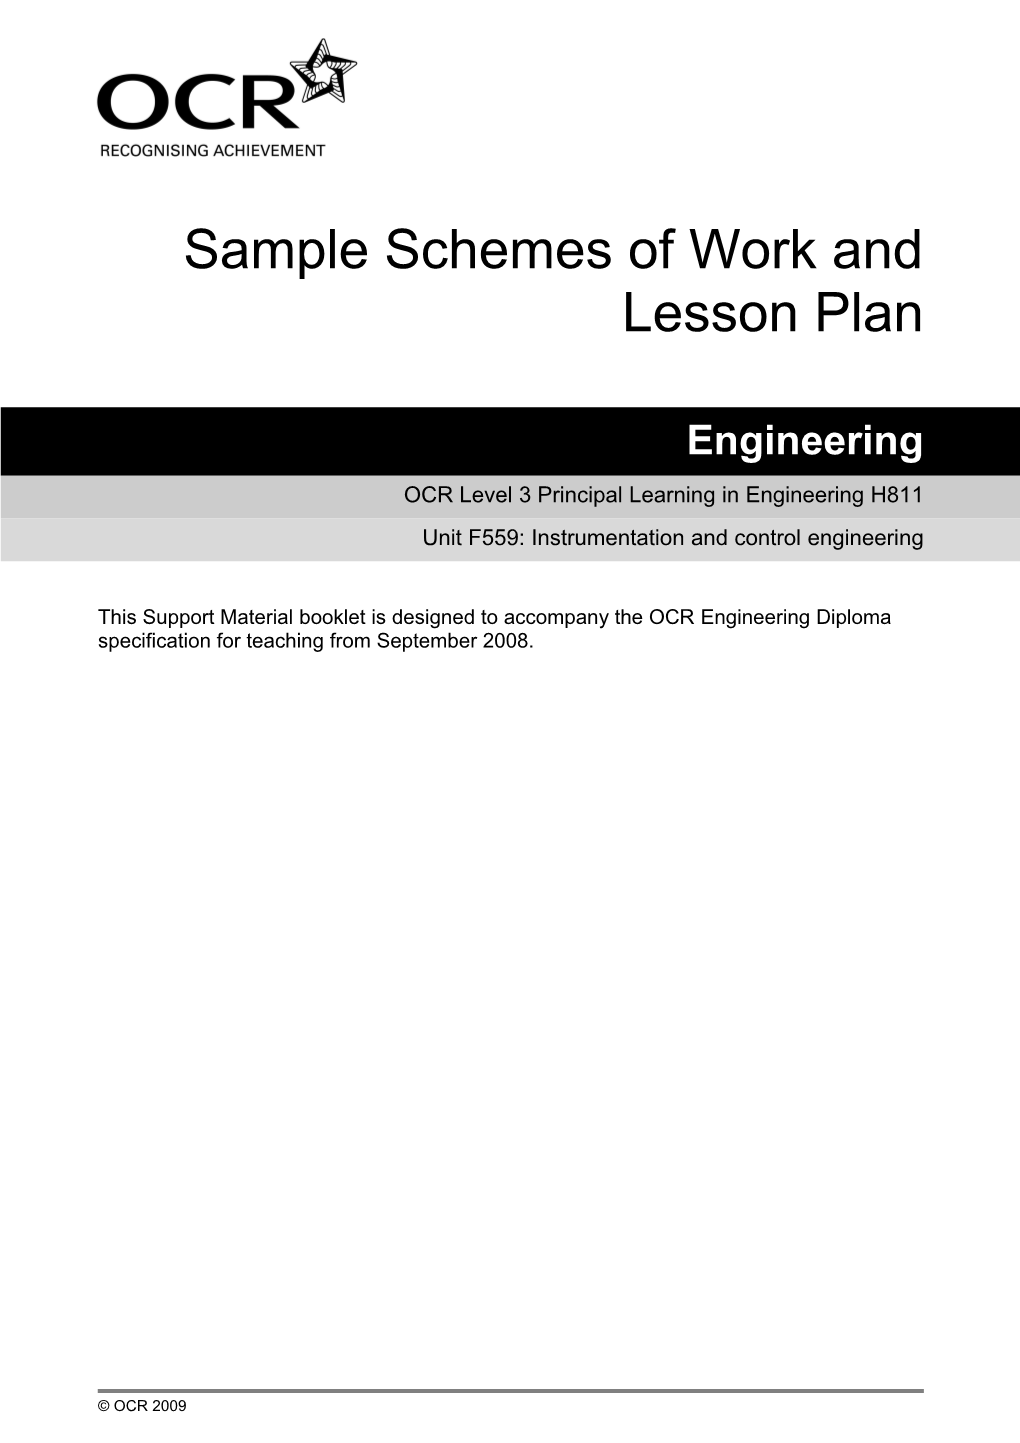 Sample Schemes of Work and Lesson Plan